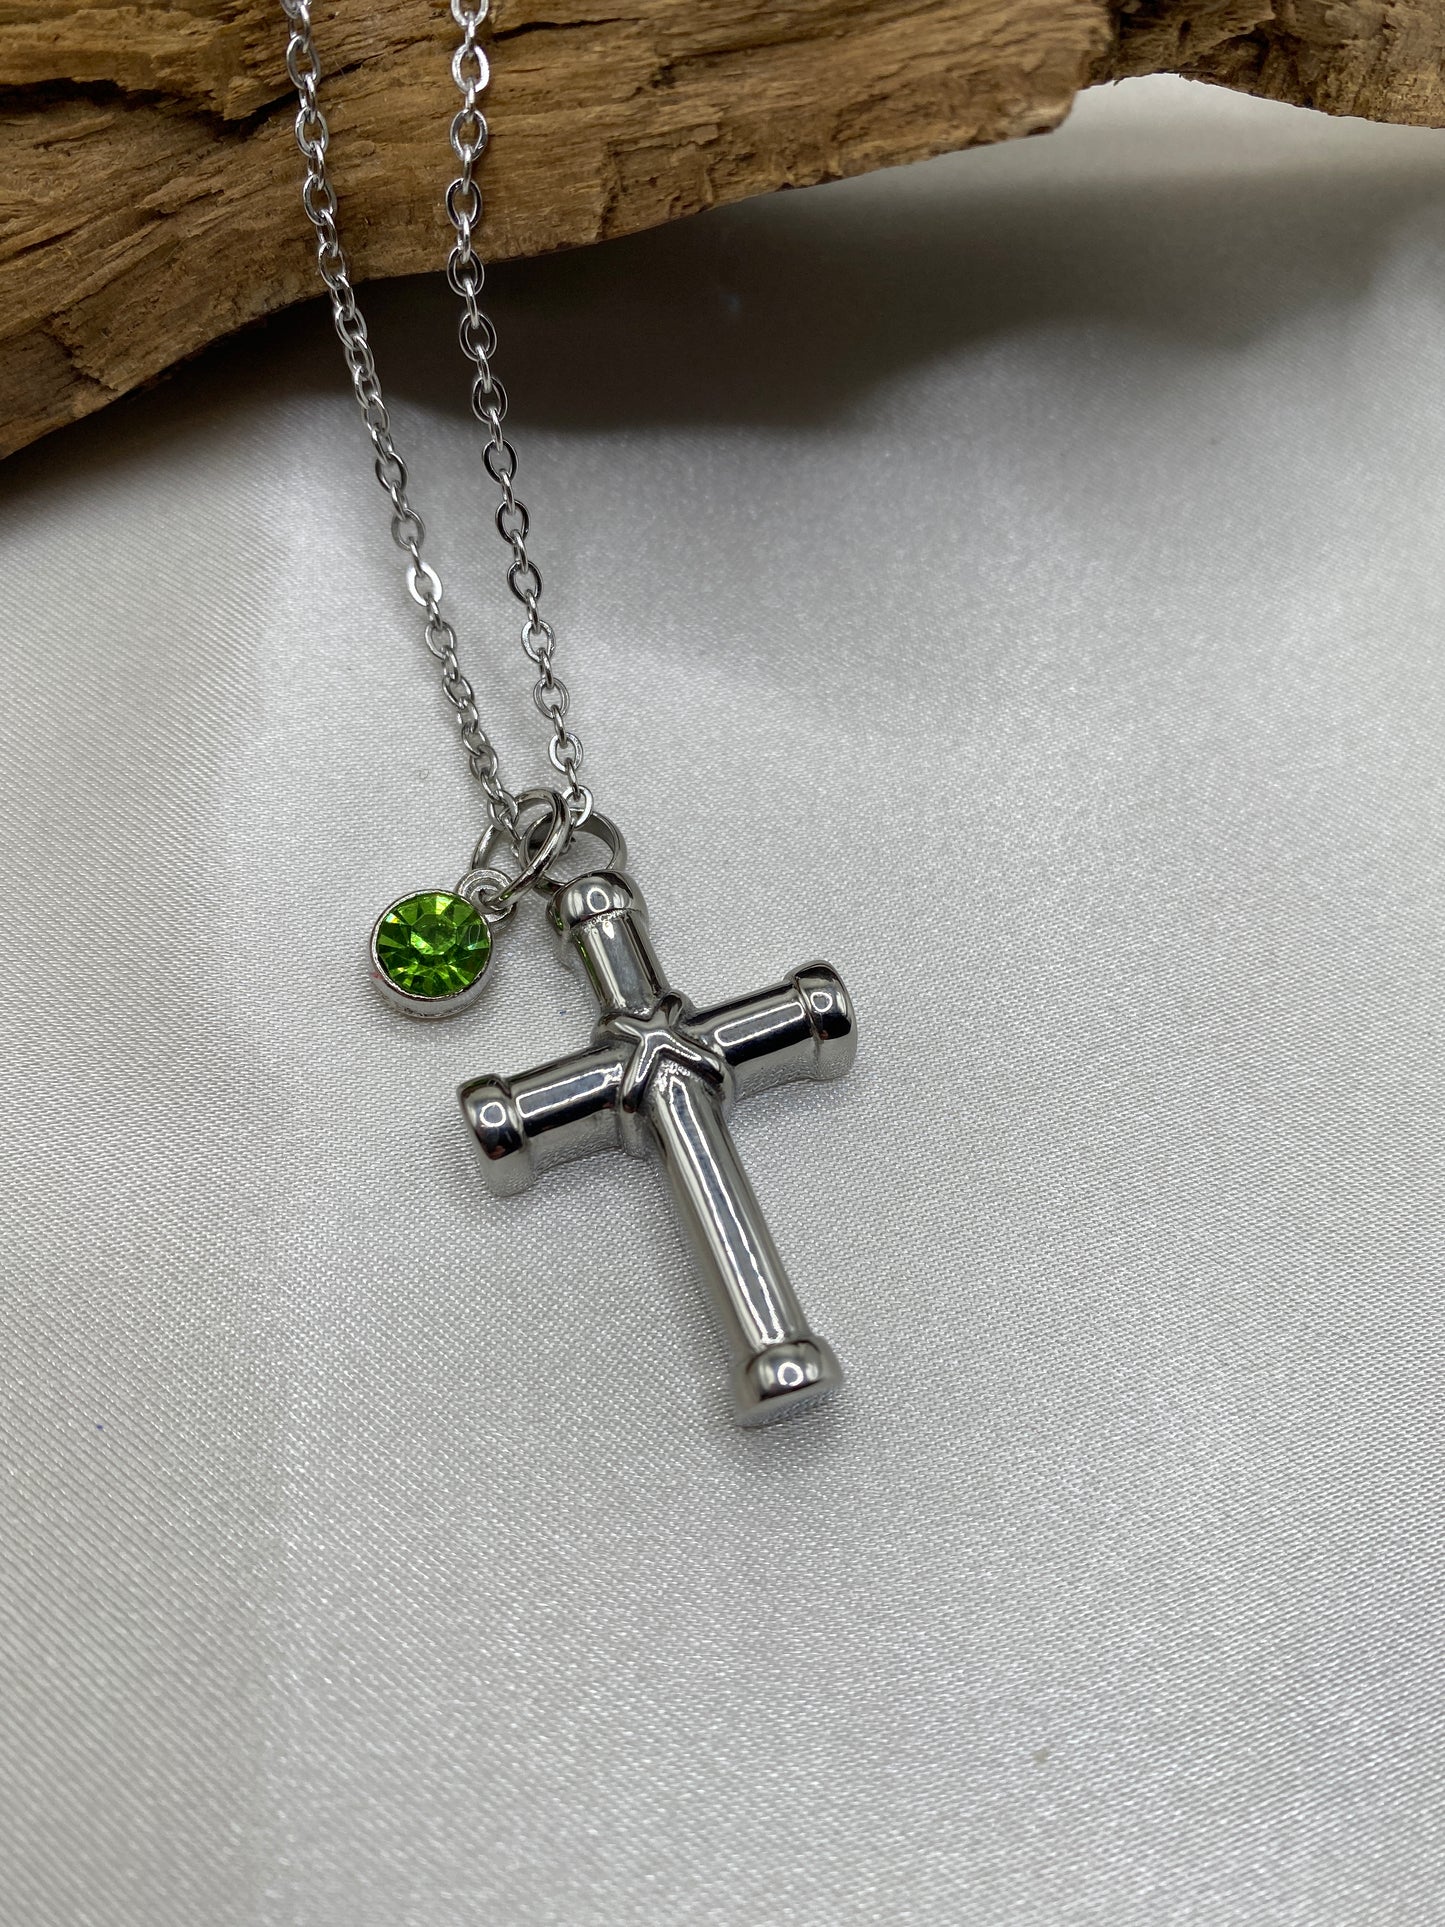 Classic Cross Urn Memorial Necklace with Birth Stone - Personalized Keepsake for Human Ashes, Engravable Stainless Steel Pendant